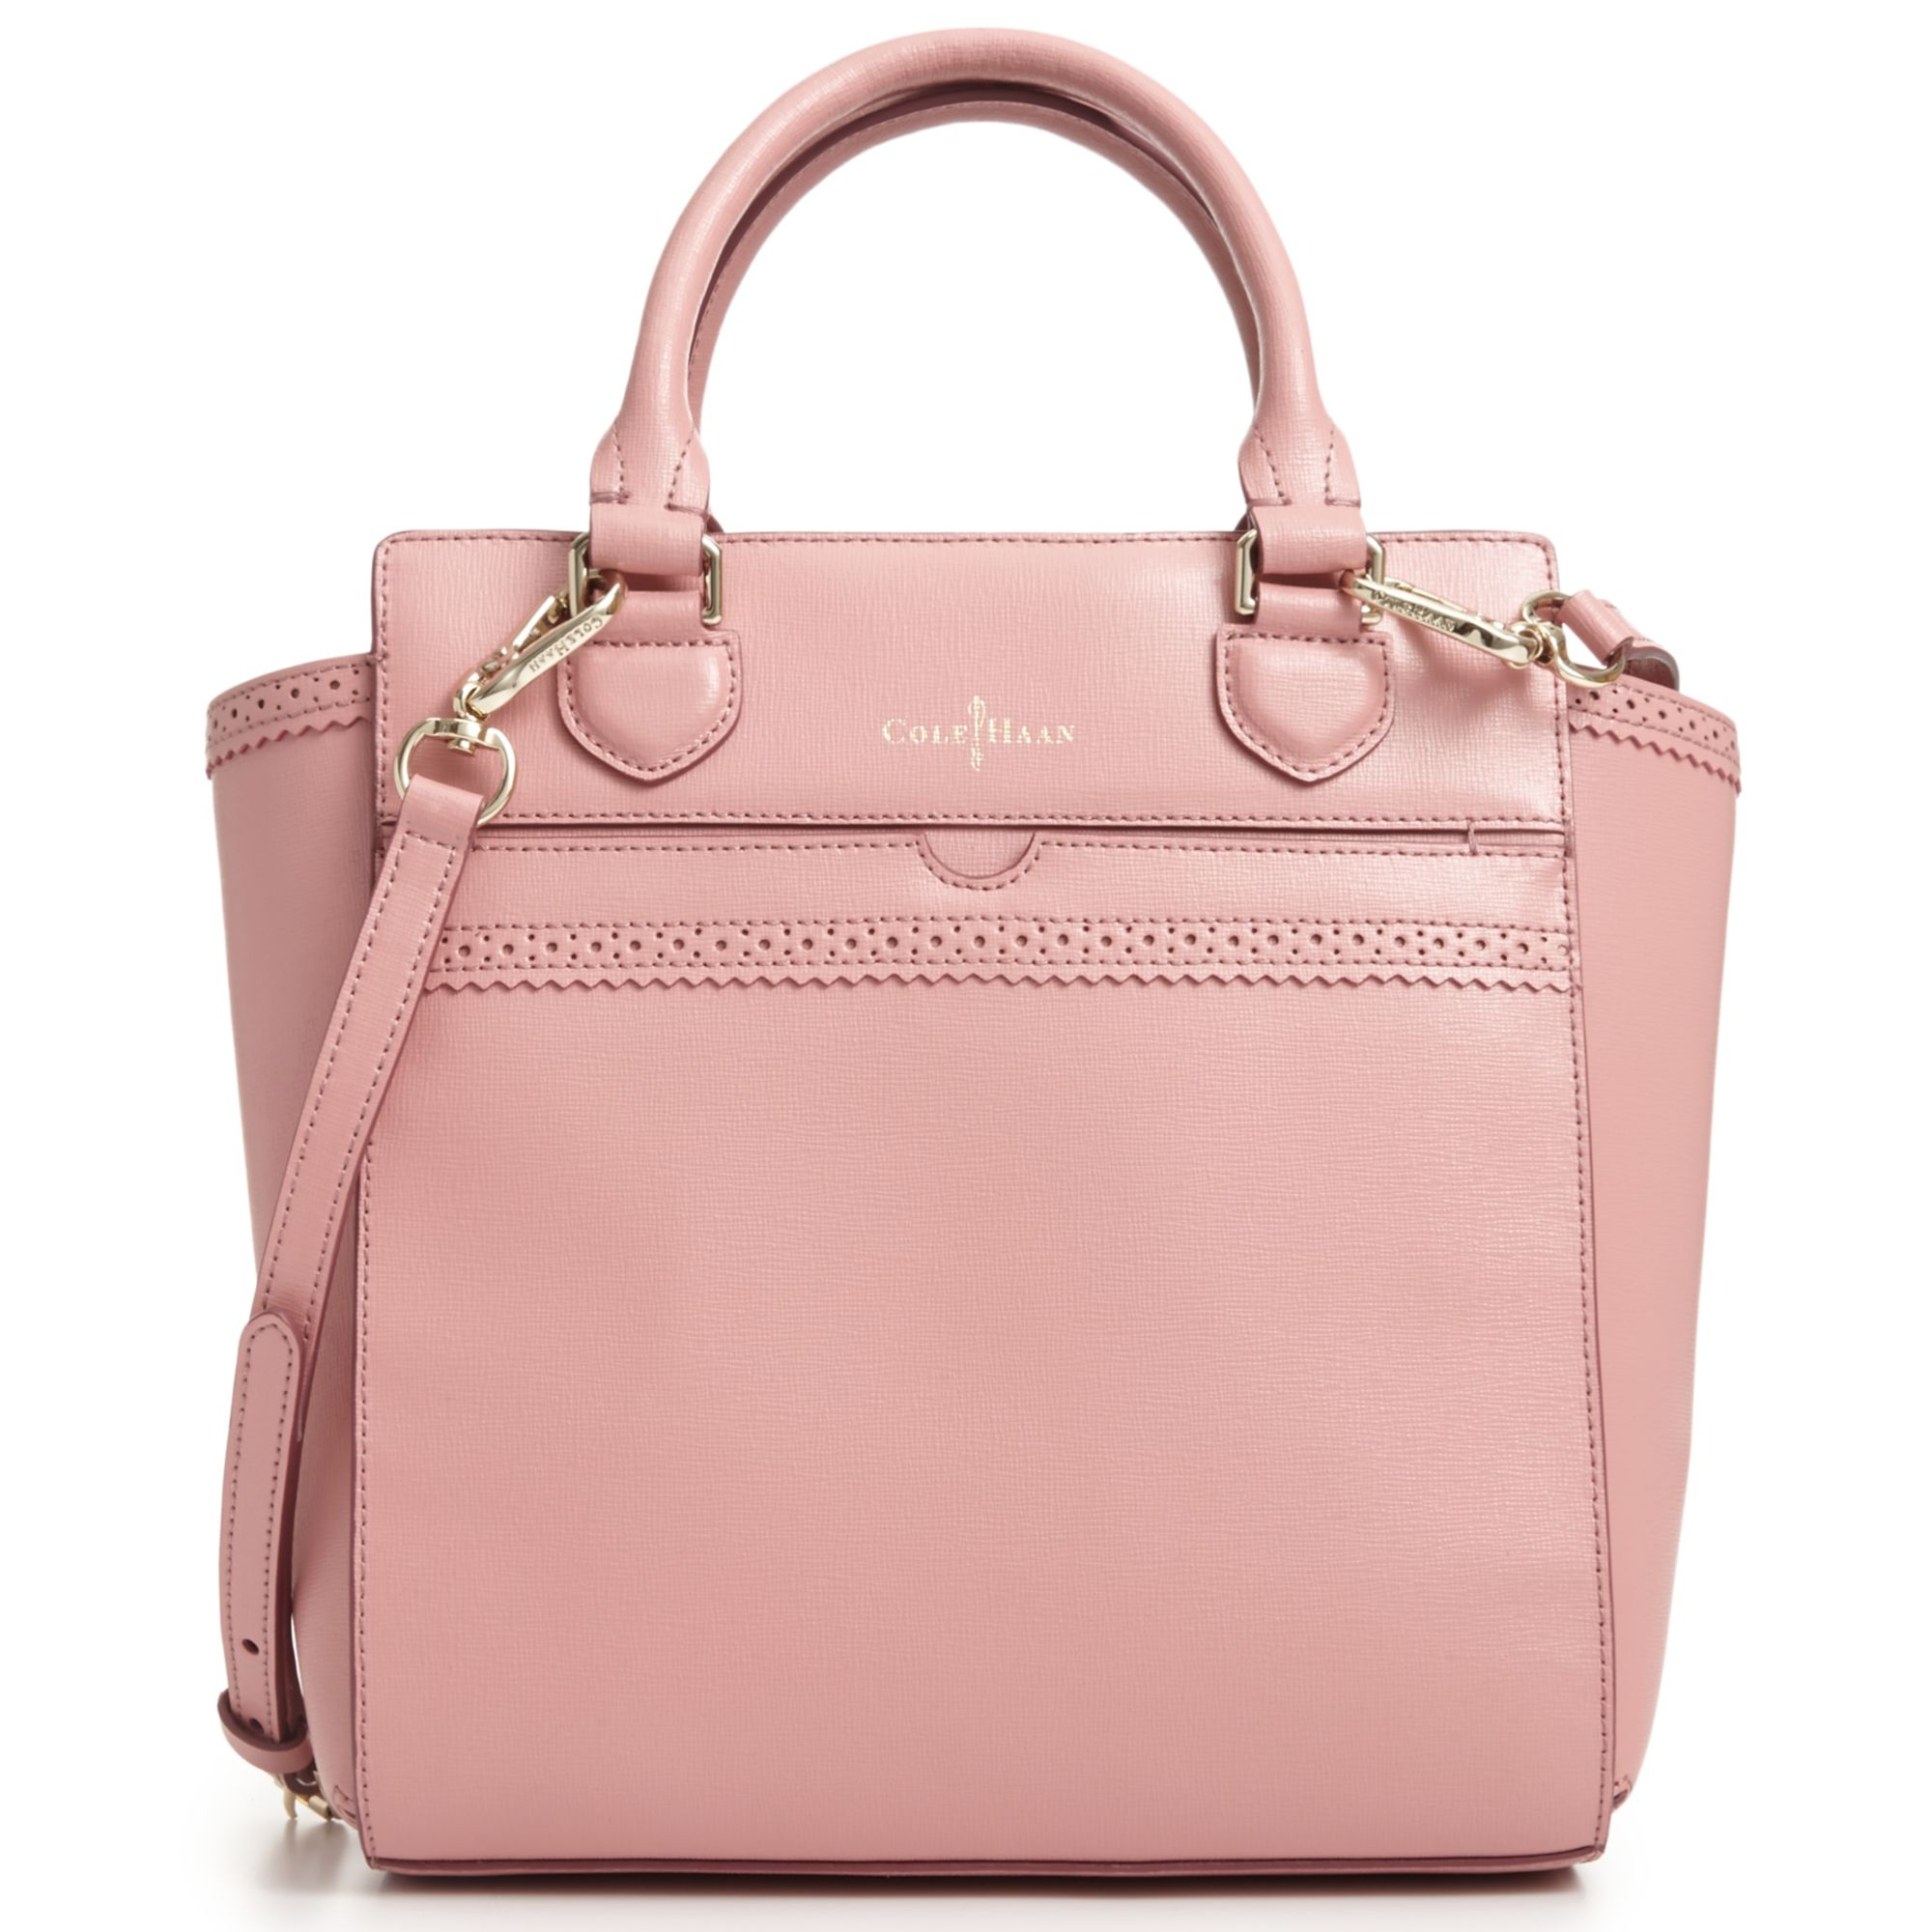 Lyst - Cole Haan Gladstone Mini North South Tote Crossbody in Pink